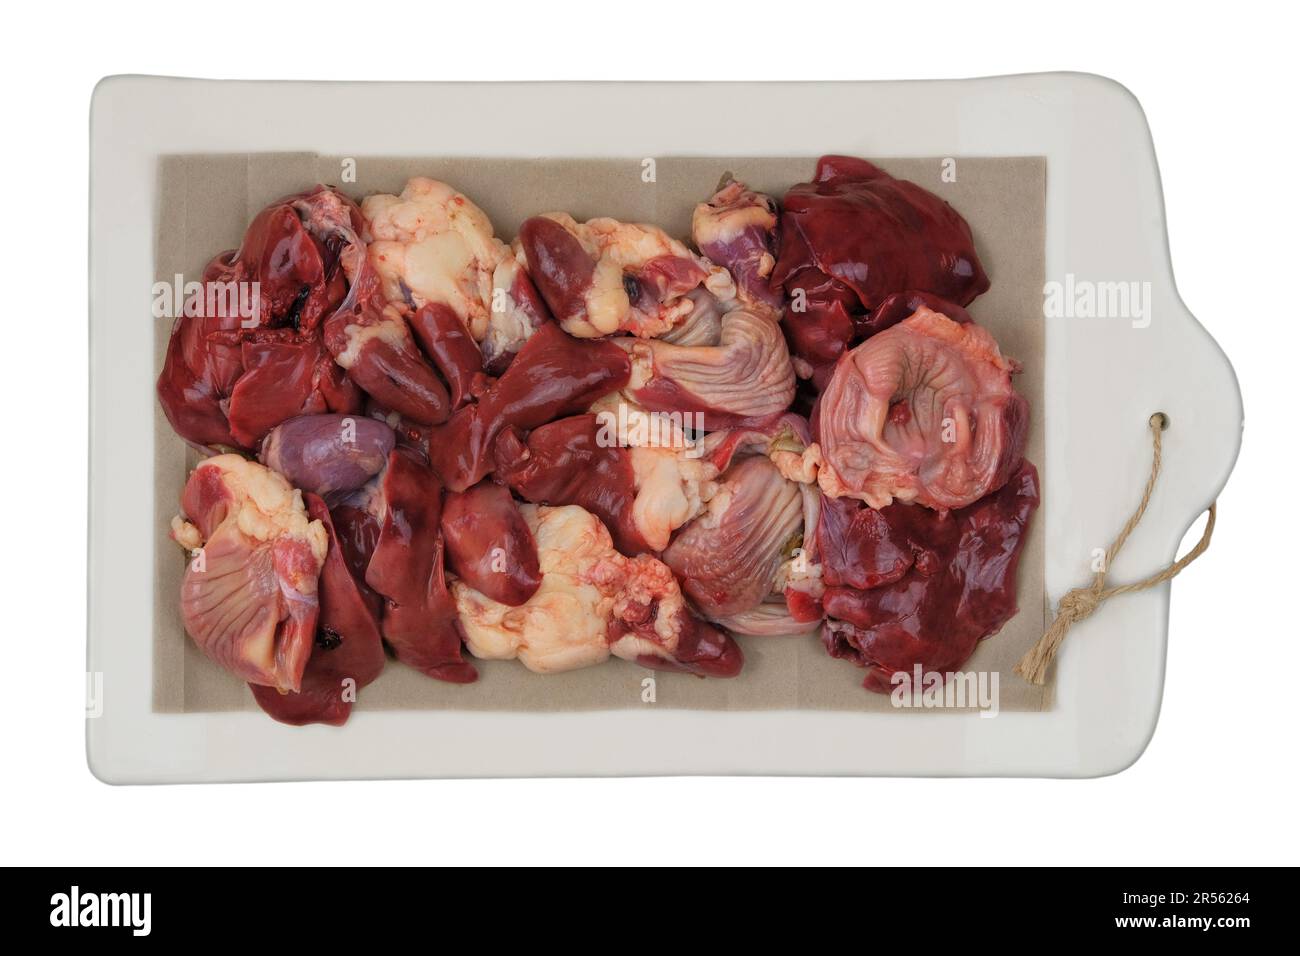 Raw chicken giblets on a ceramic board isolated on white background. Chicken stomachs, hearts and livers are prepared for cooking. Stock Photo